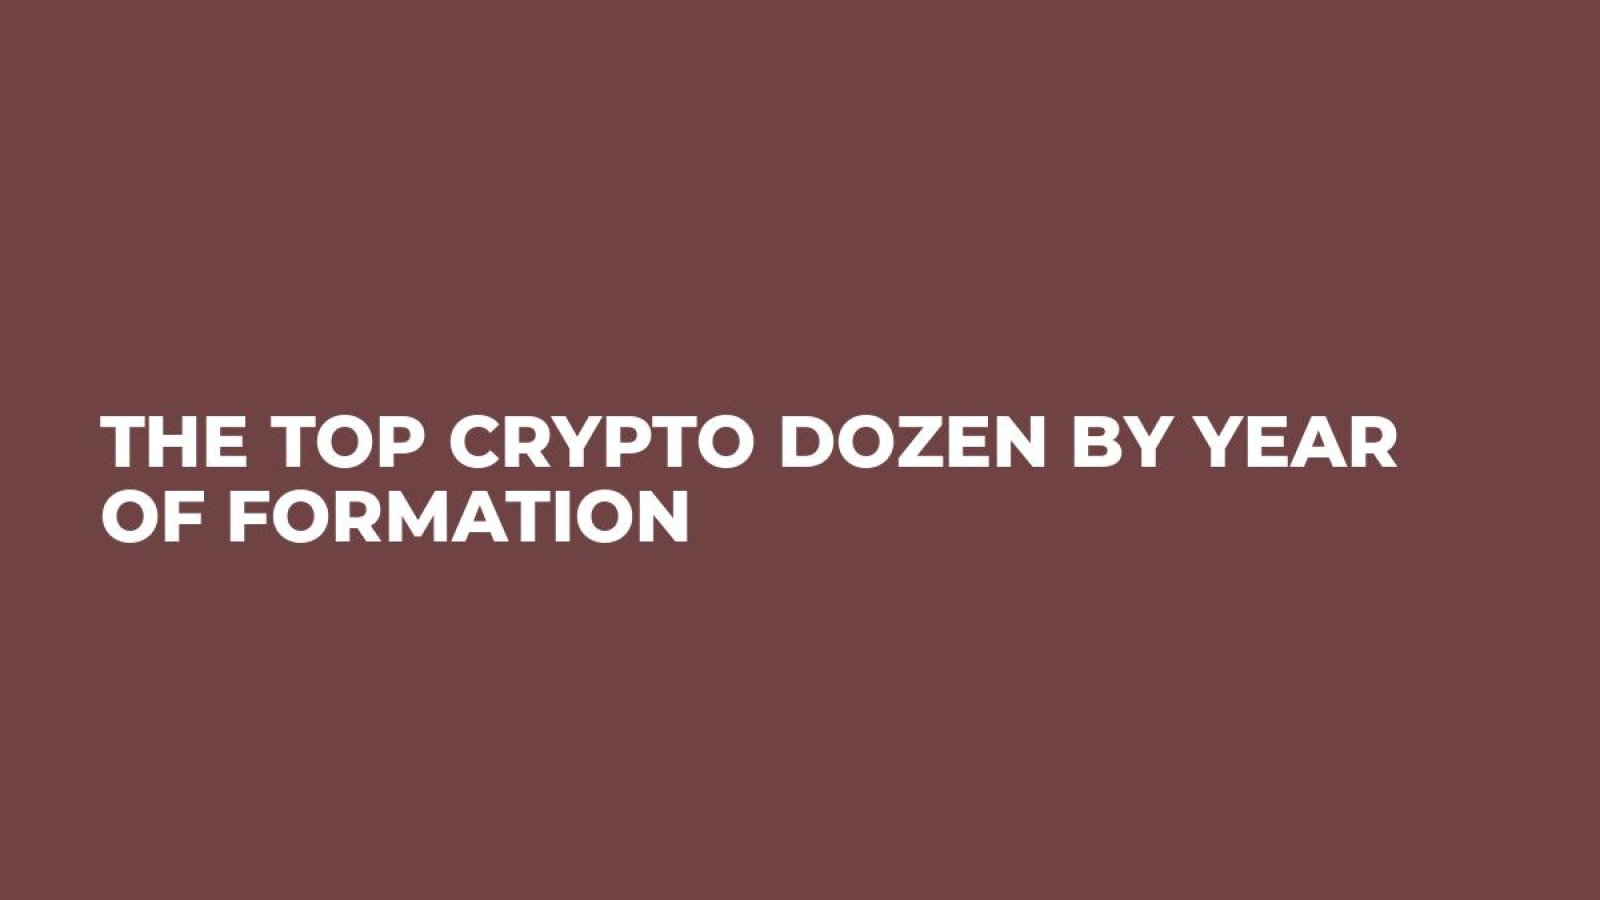 The Top Crypto Dozen by Year of Formation